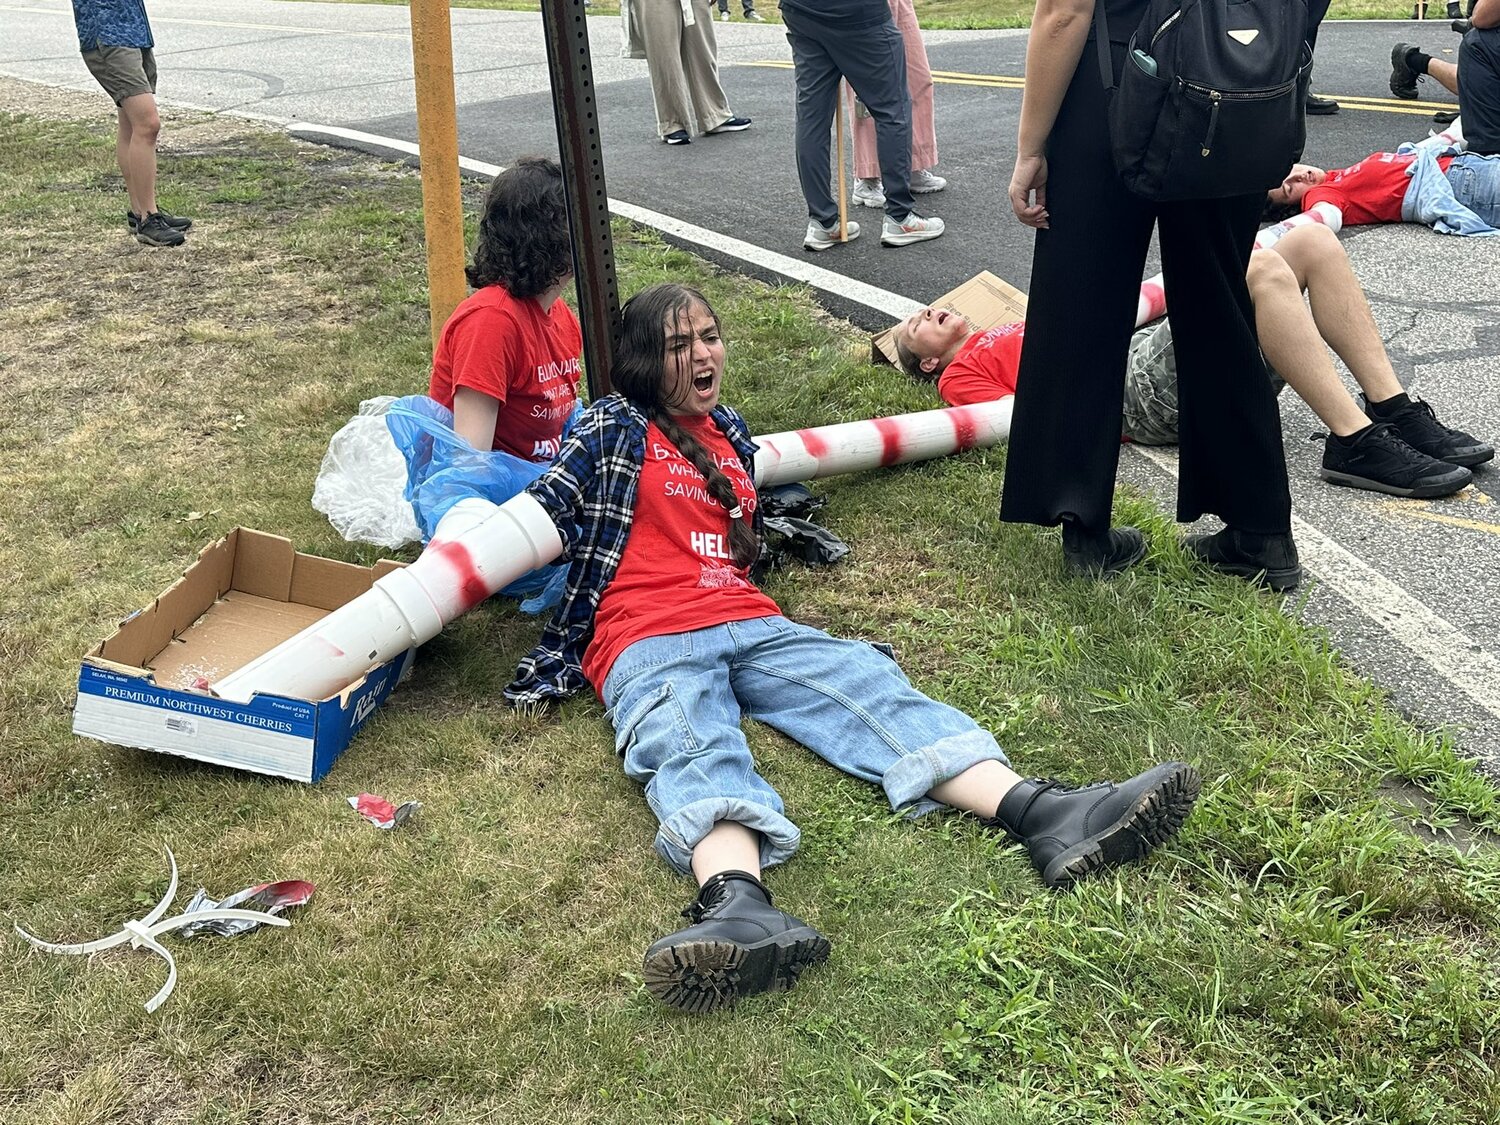 Protesters attempted to block access to East Hampton Airport, to protest the outsized contribution that private aircraft usage has on climate change. 
MARGARET KLEIN